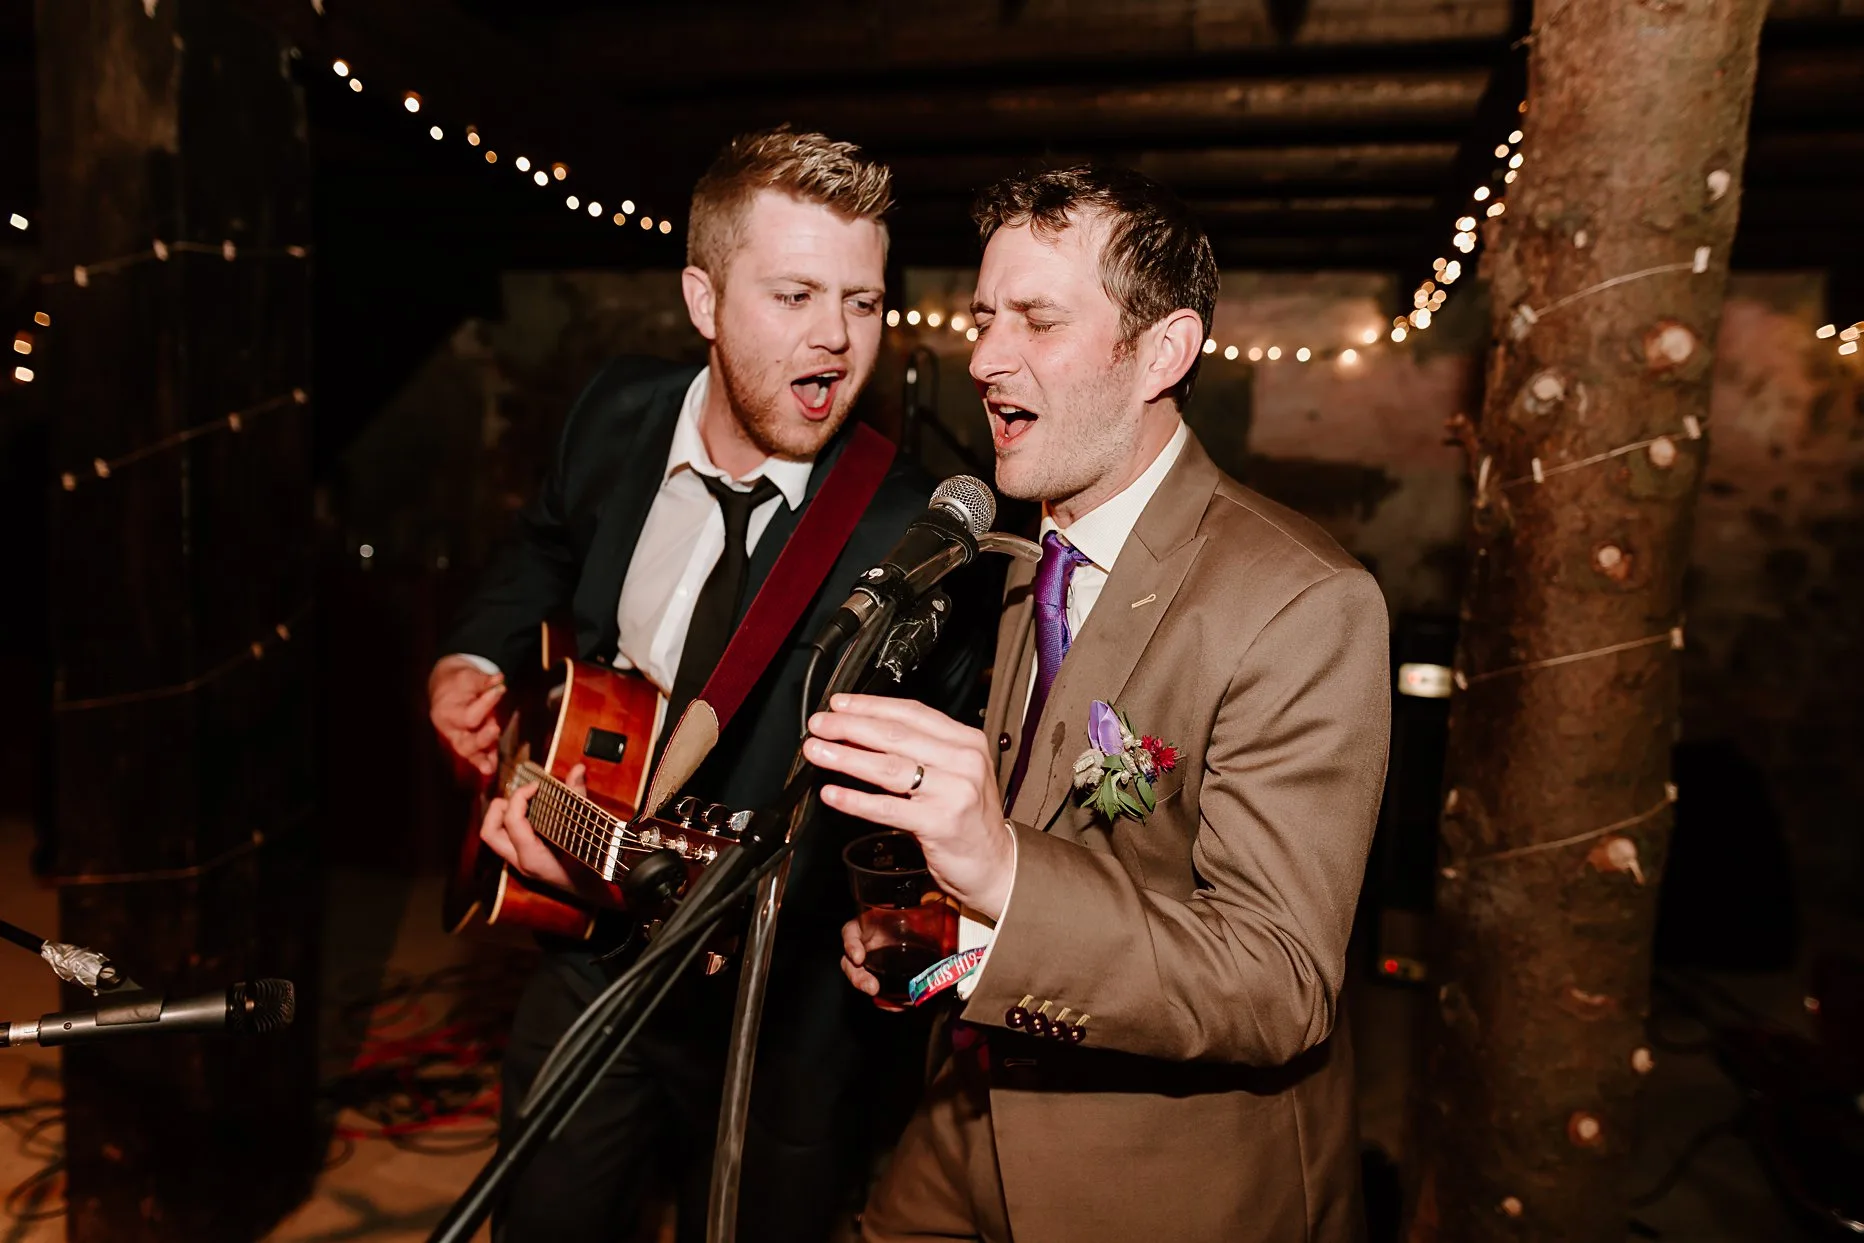 Groom sining into the microphone with another wedding guest holding a guitar.